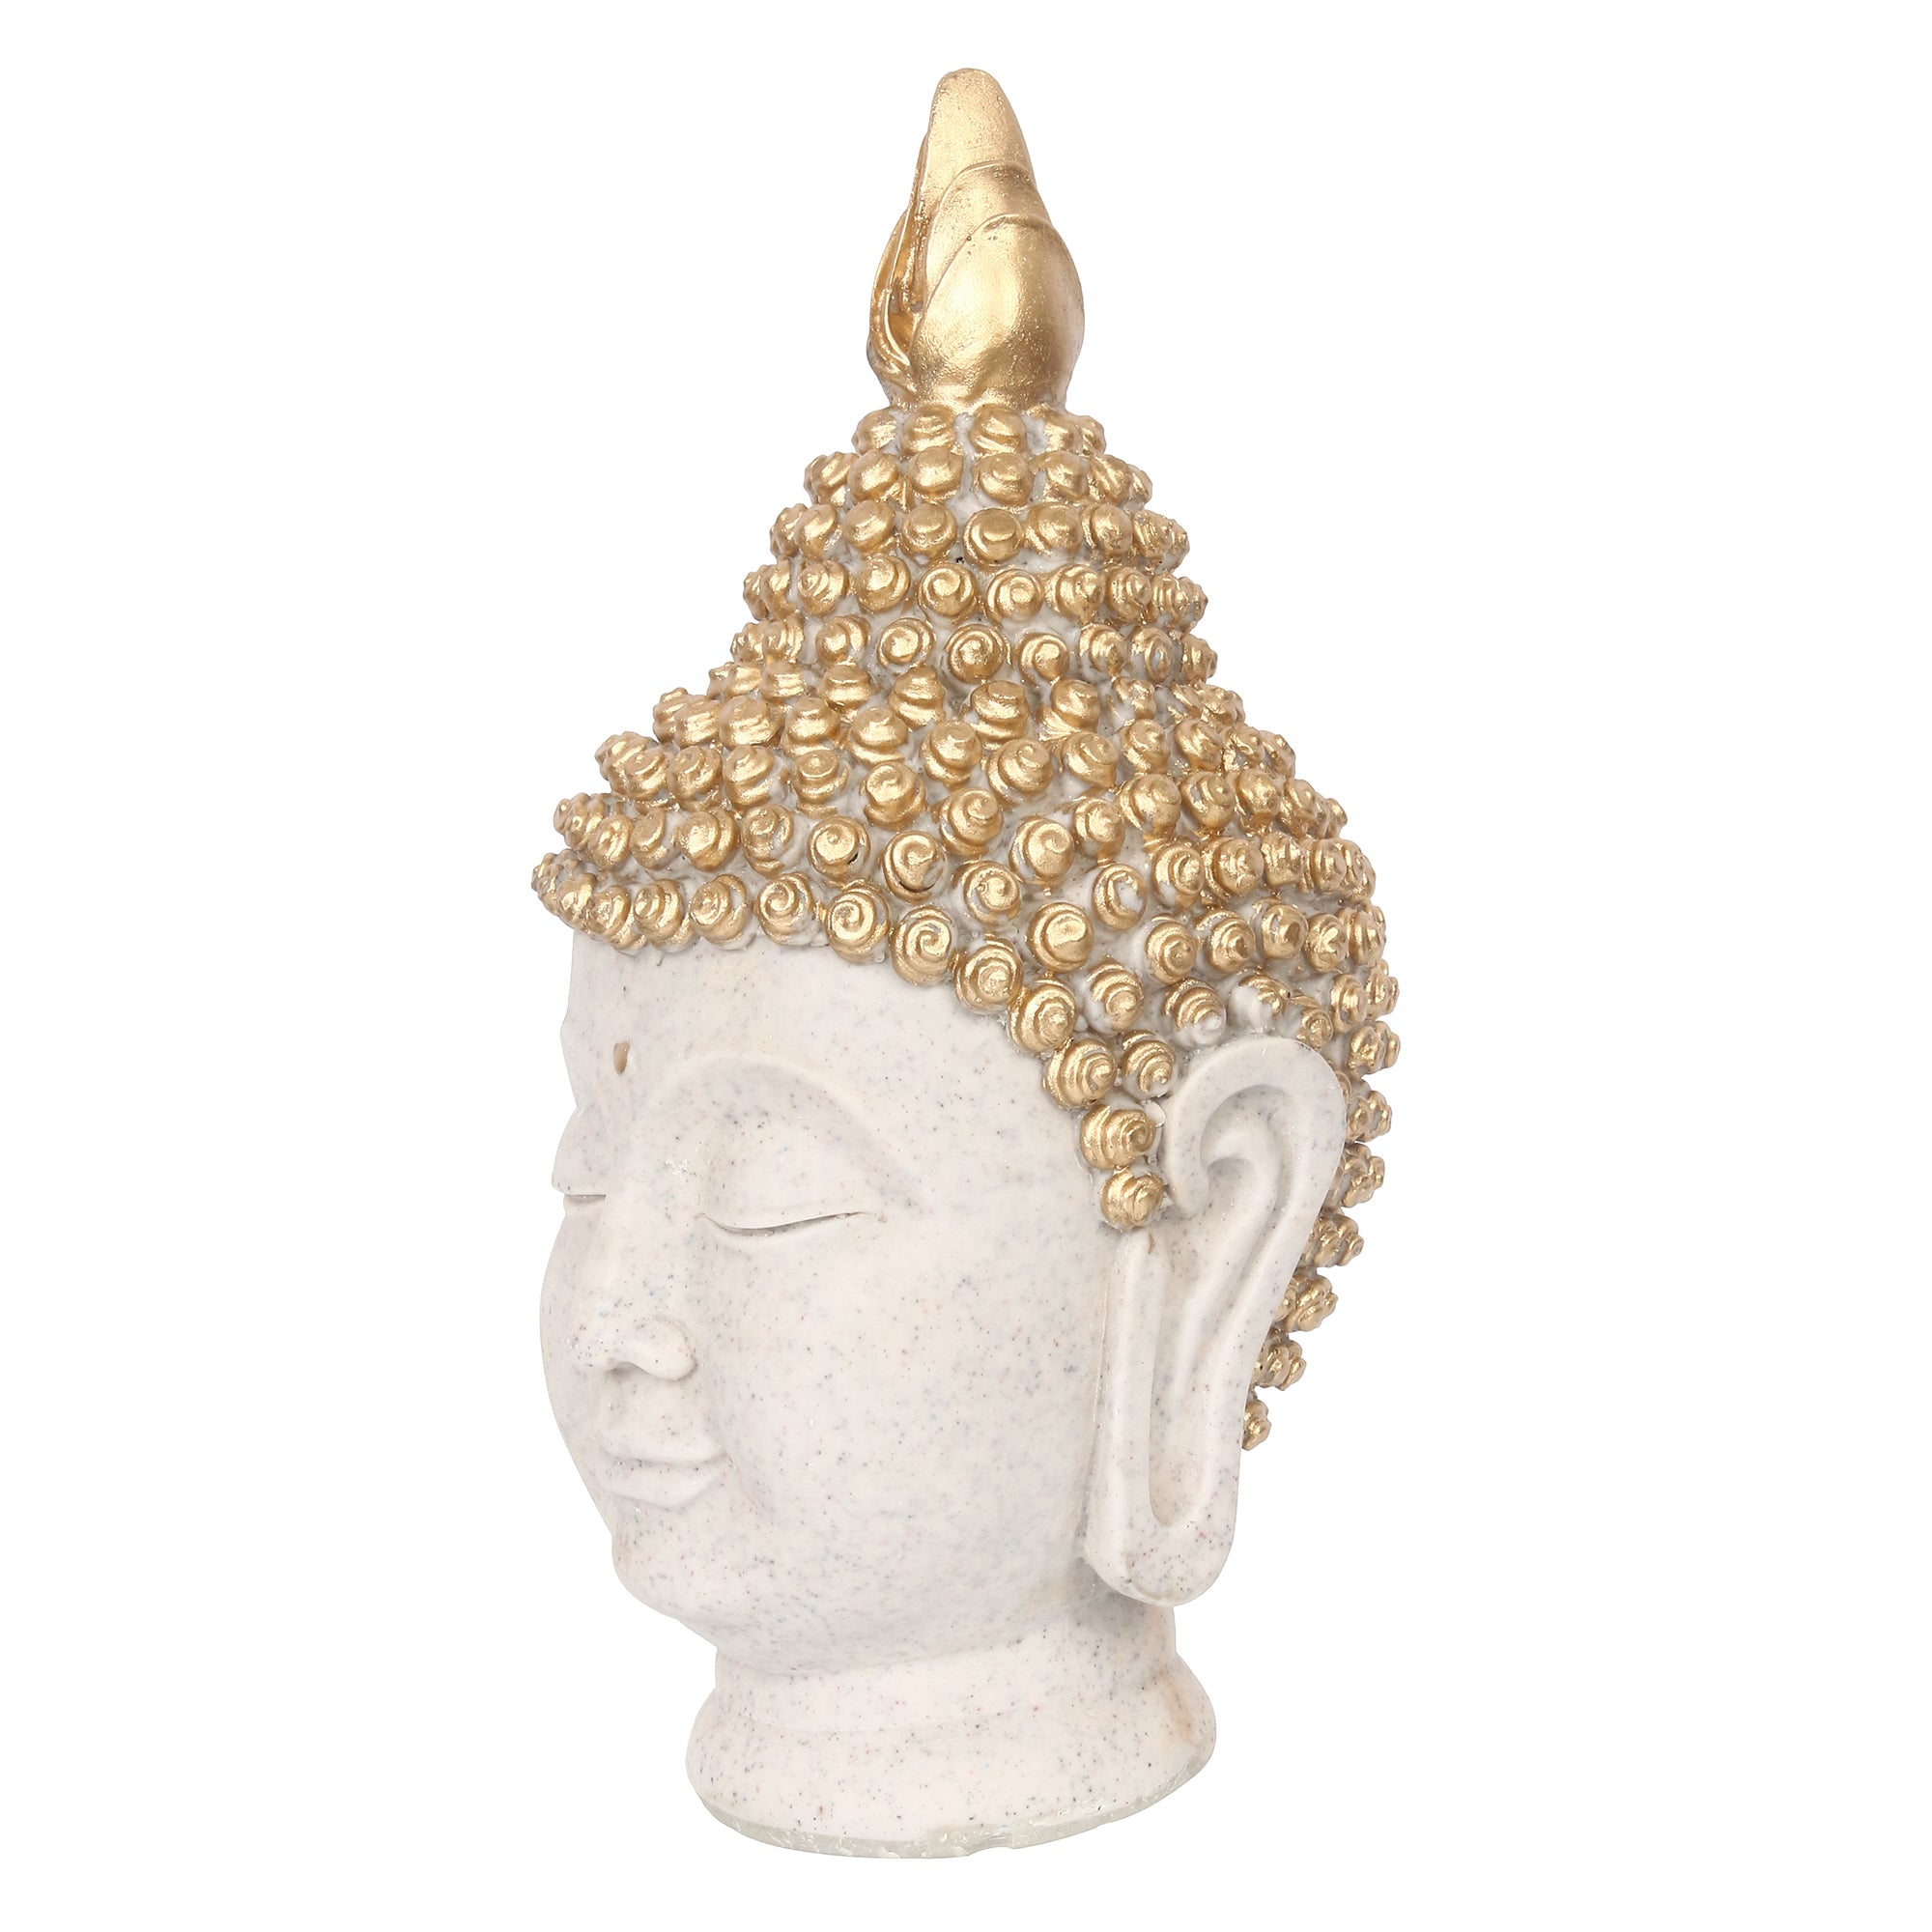 Polyresin Gold and White Meditating Buddha Head Statue 4